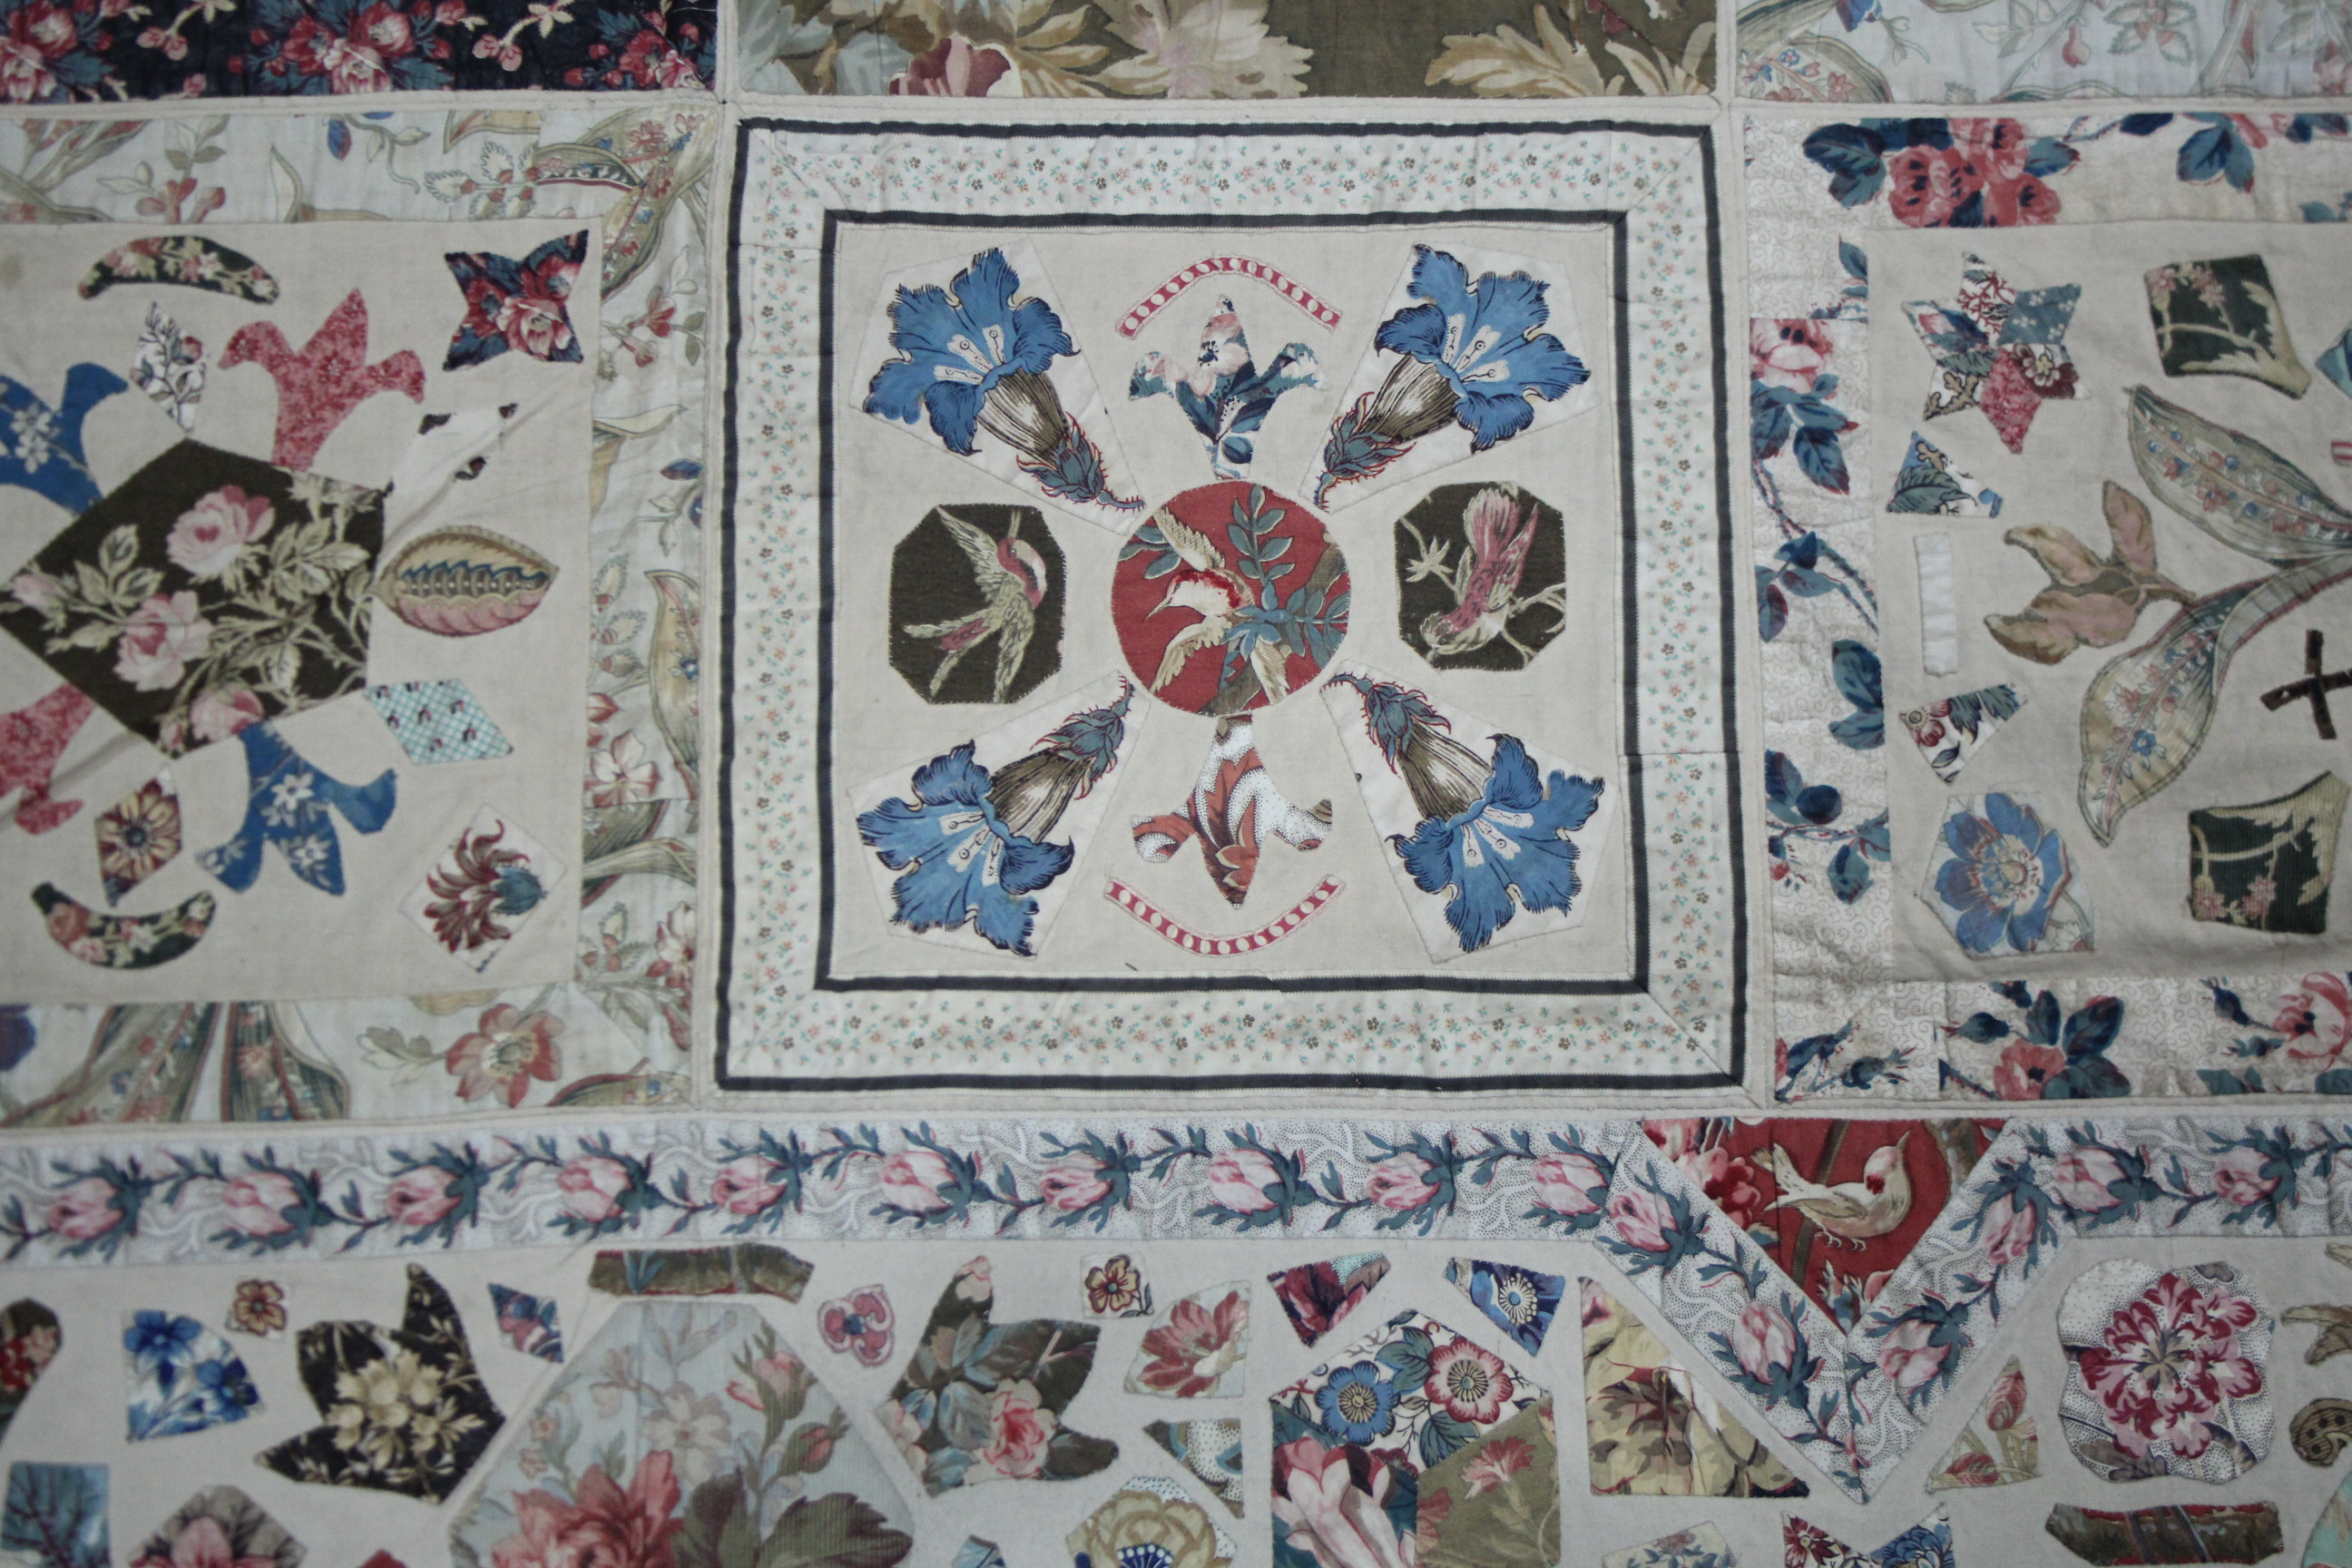 A VICTORIAN PATCHWORK BEDSPREAD or WALL HANGING comprising a wide variety of printed fabrics cut